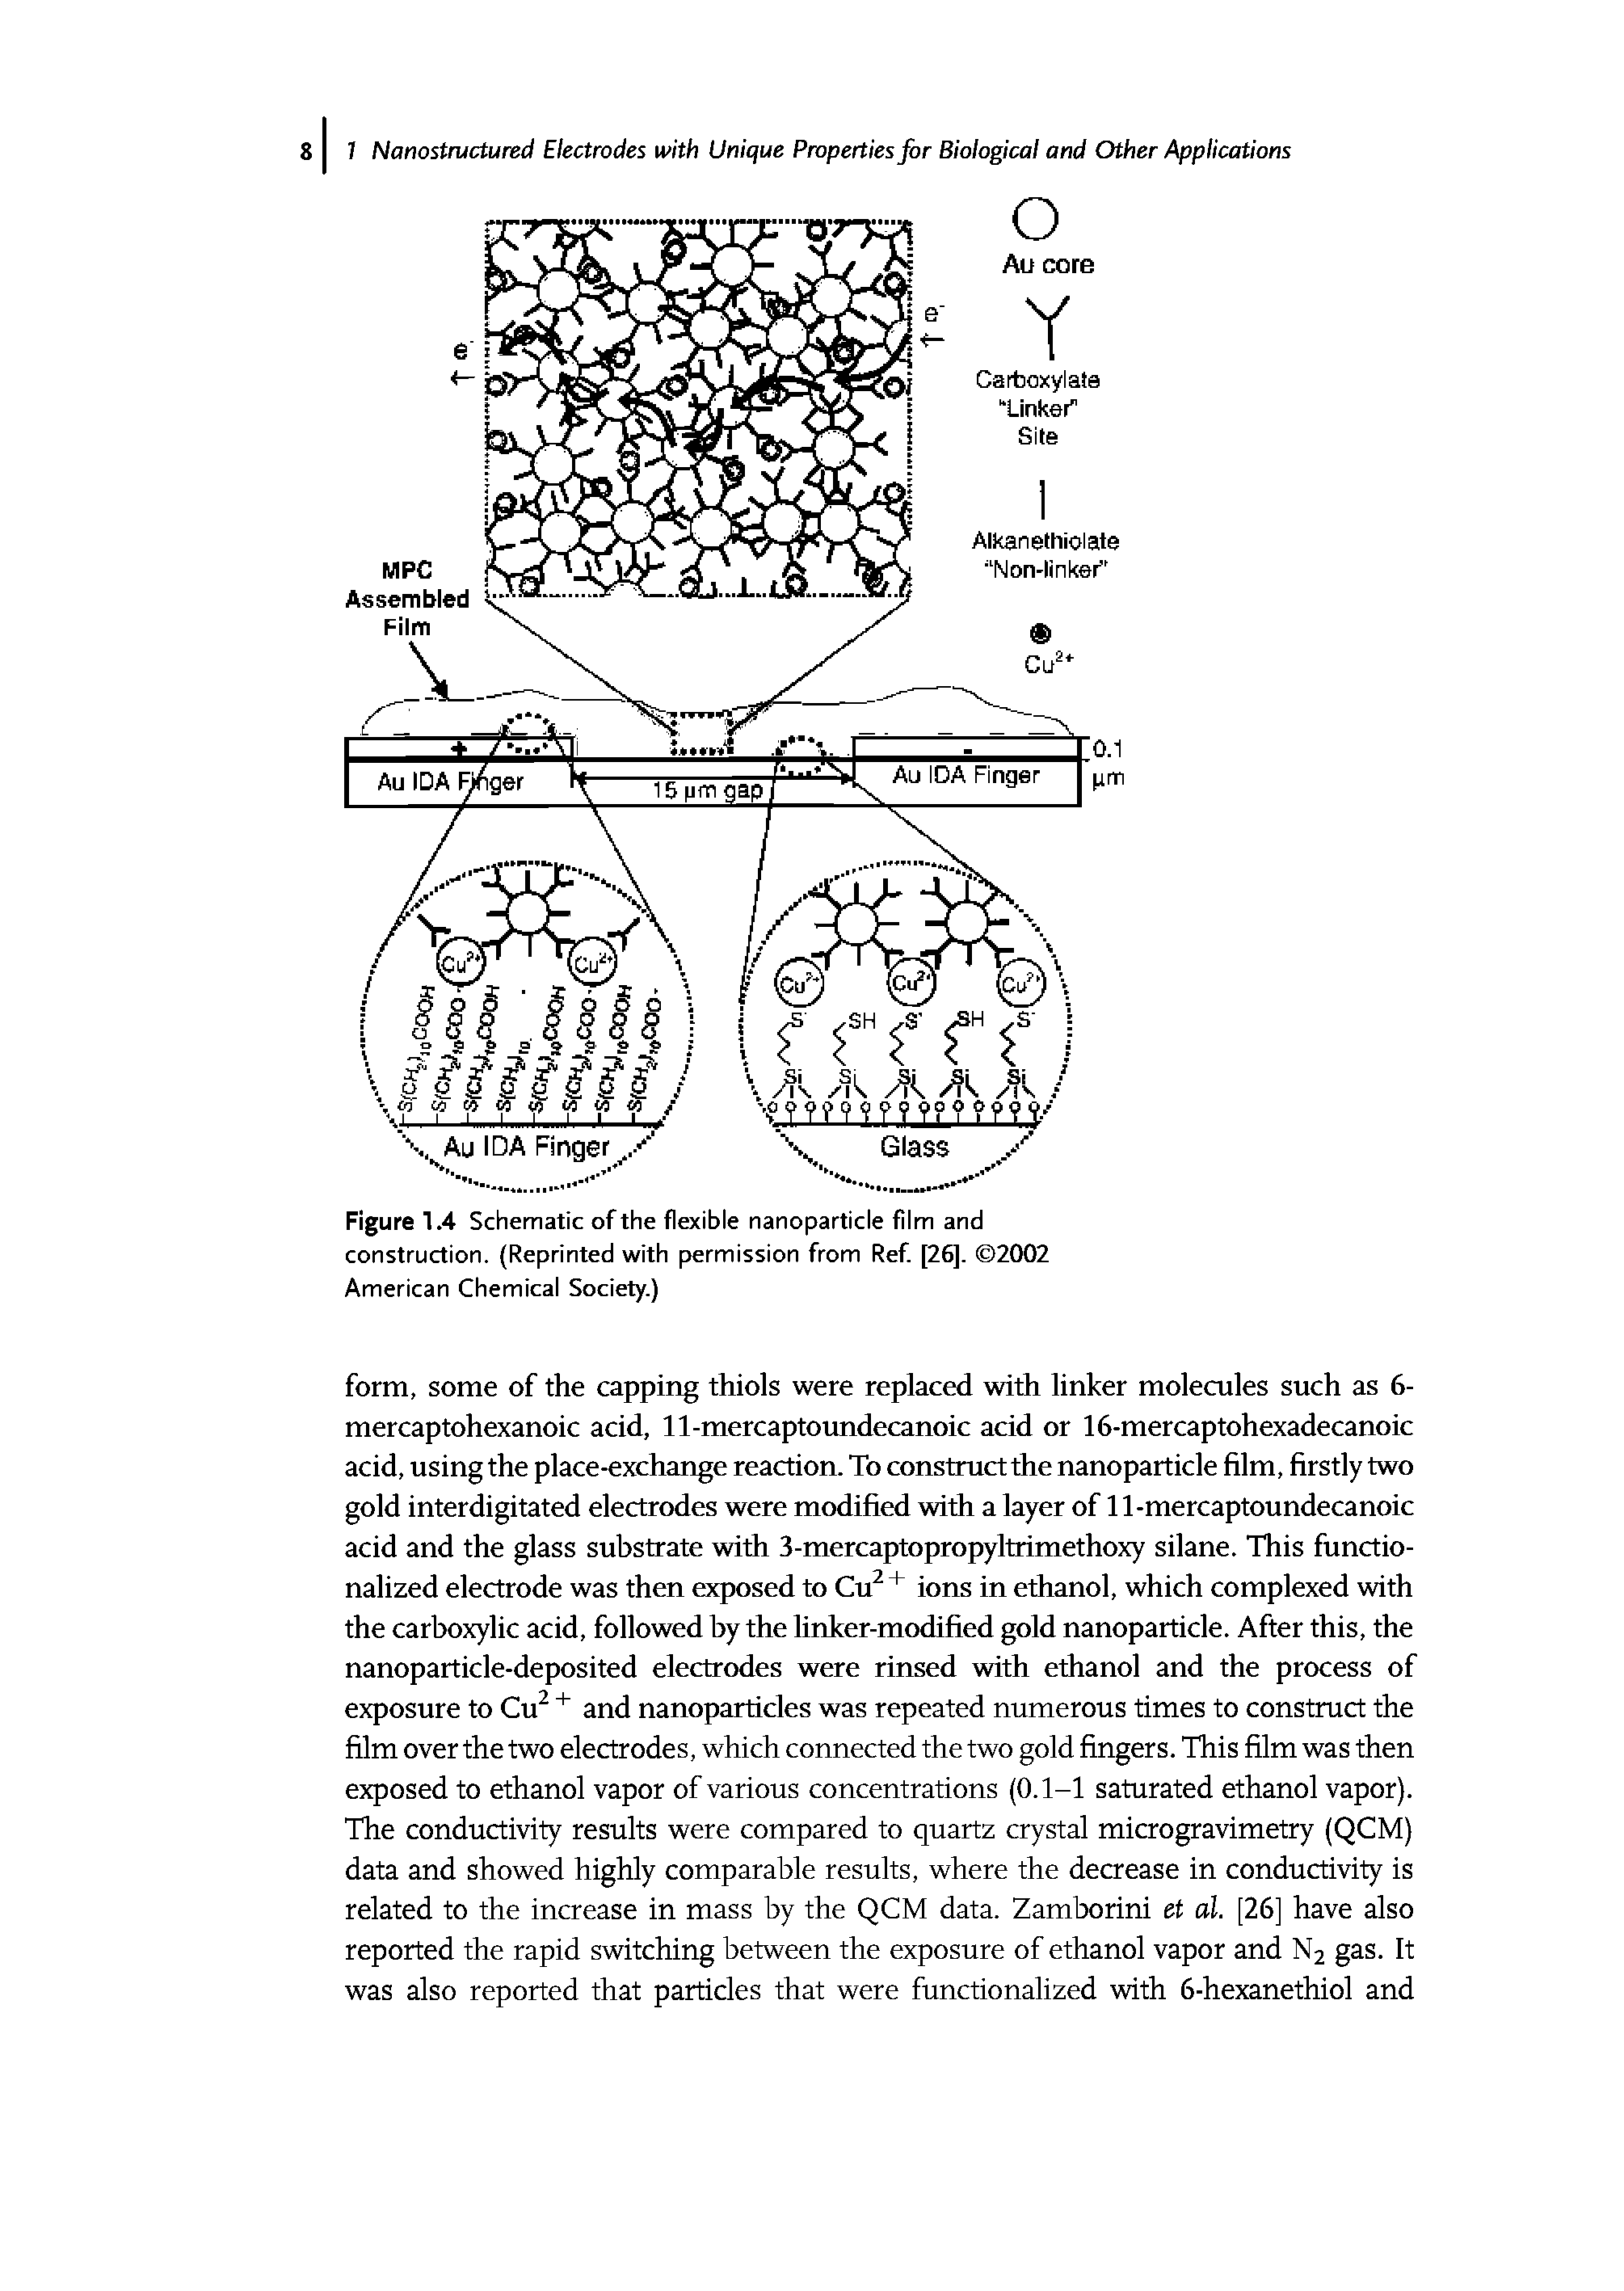 Figure 1.4 Schematic of the flexible nanoparticle film and construction. (Reprinted with permission from Ref [26], 2002 American Chemical Society.)...